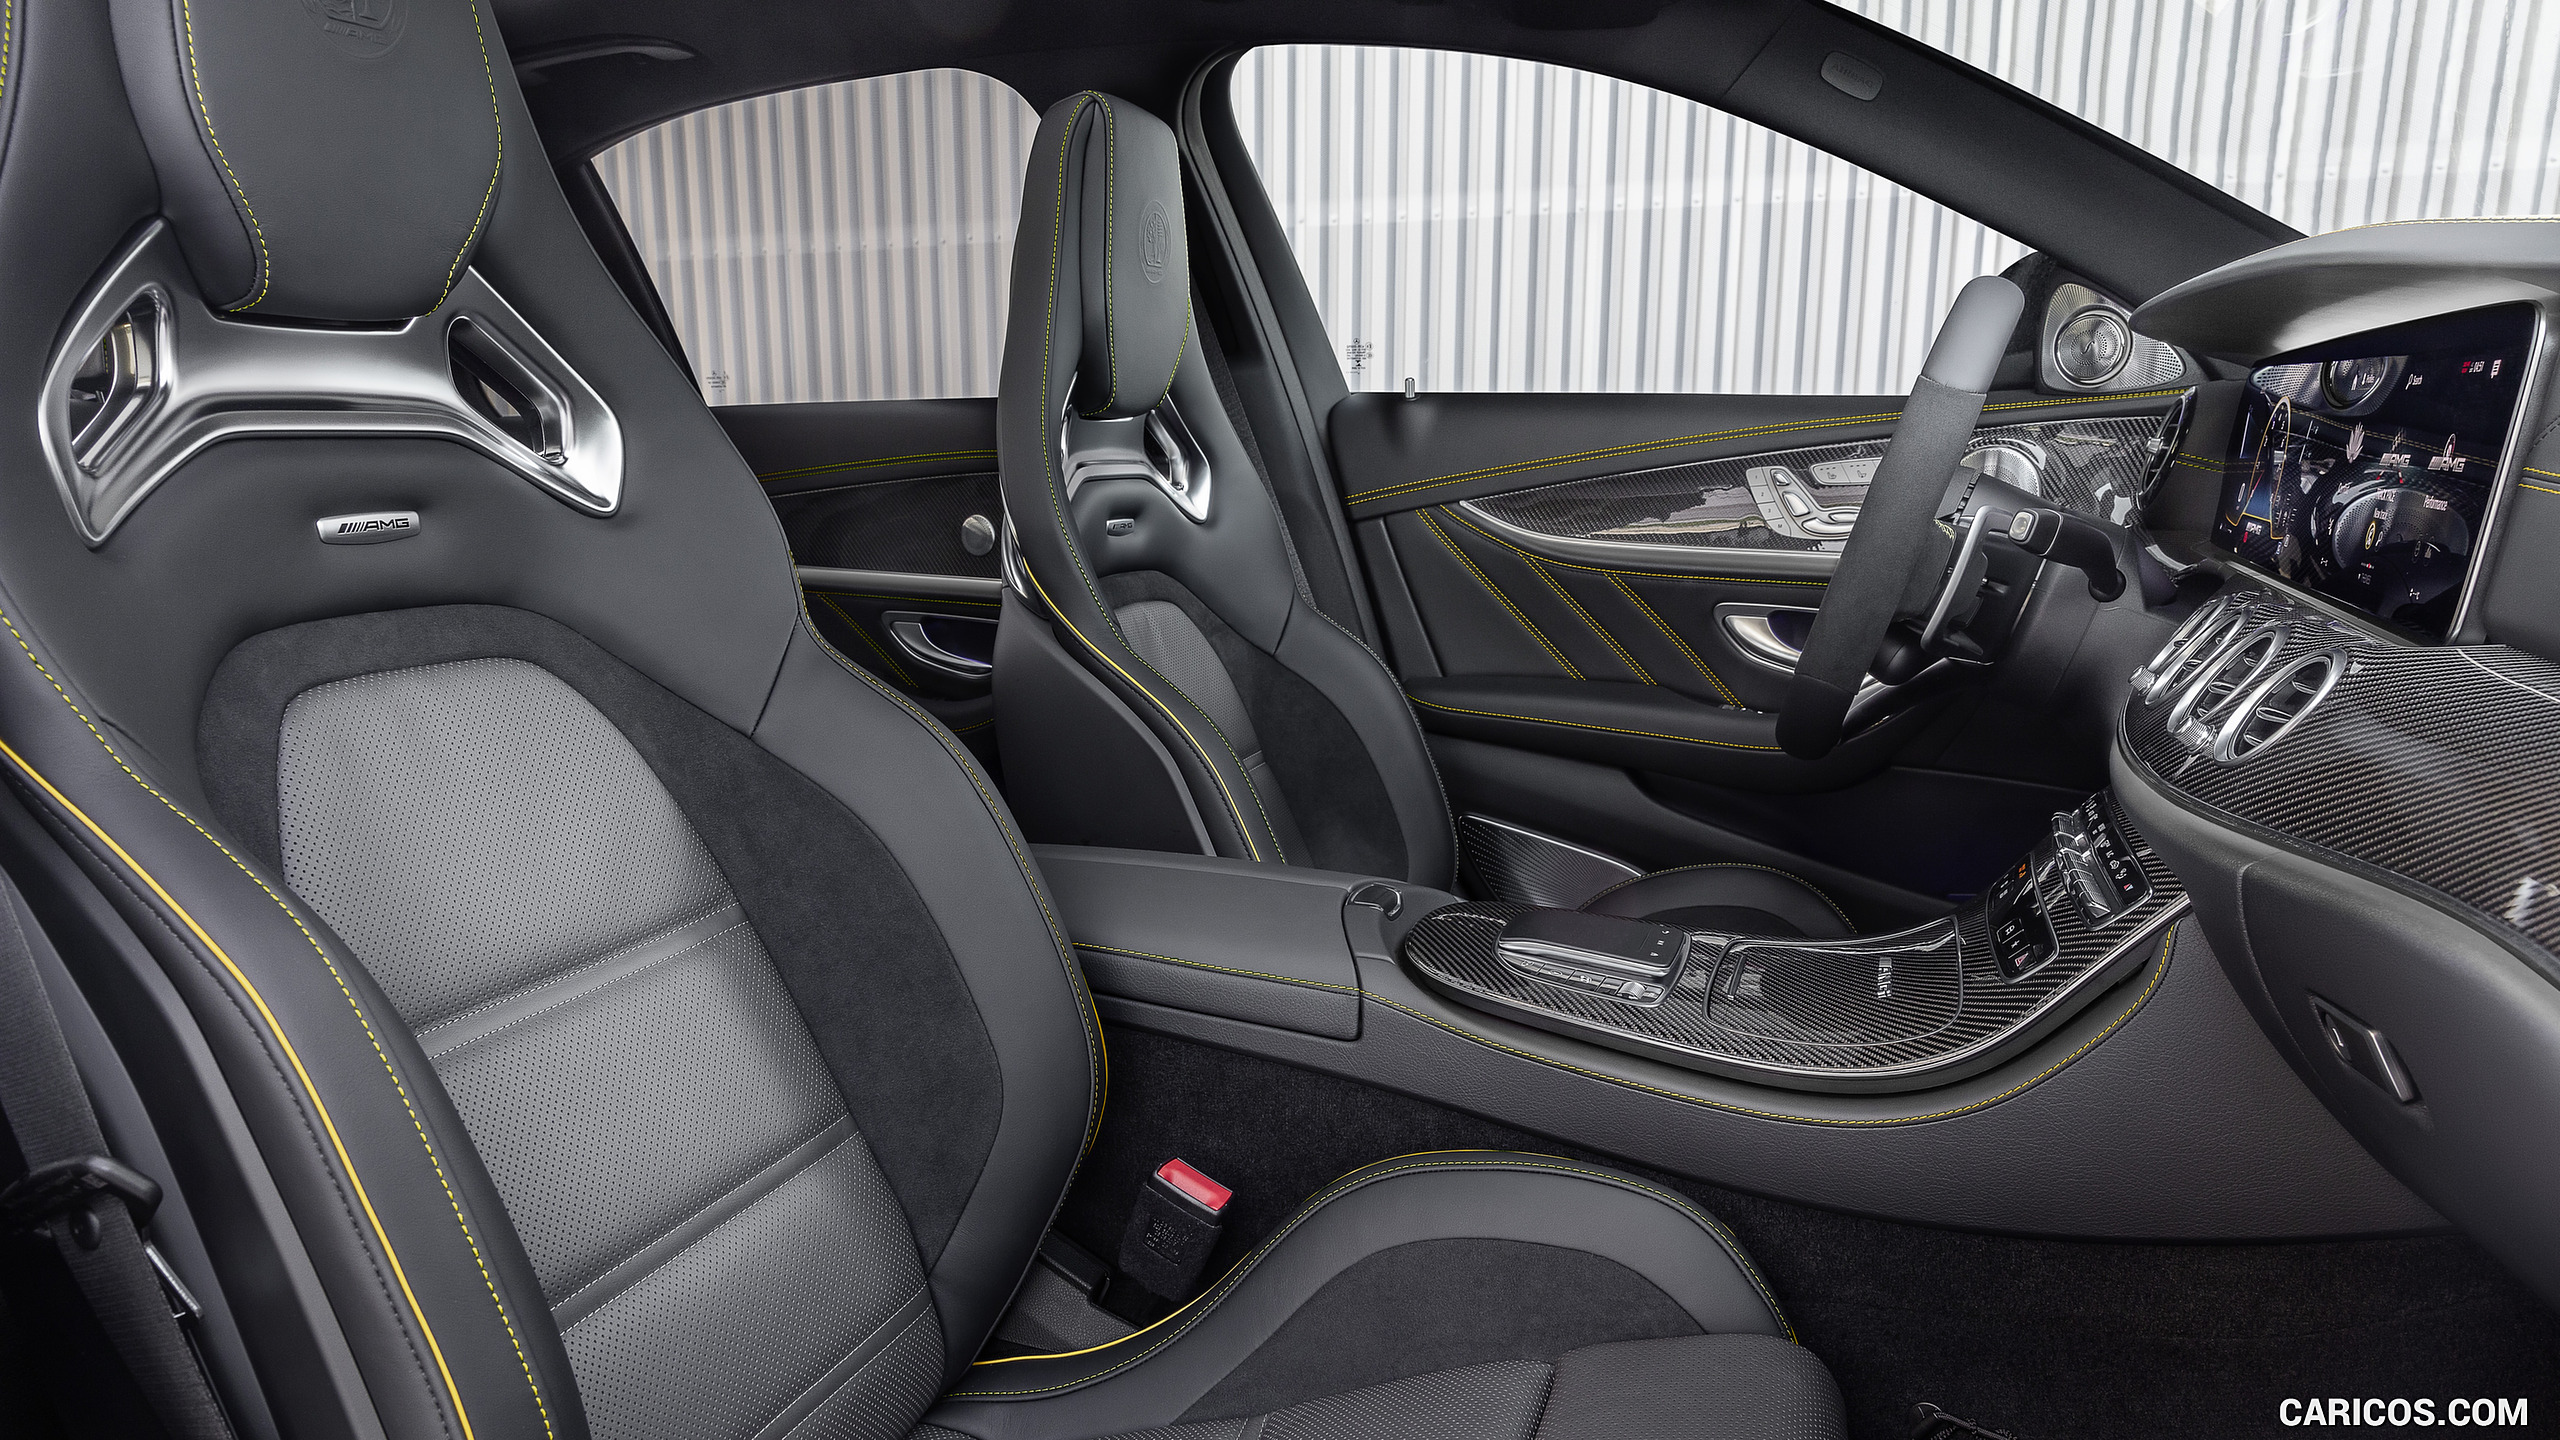 2021 Mercedes-AMG E 63 S - Interior, Front Seats, #18 of 143